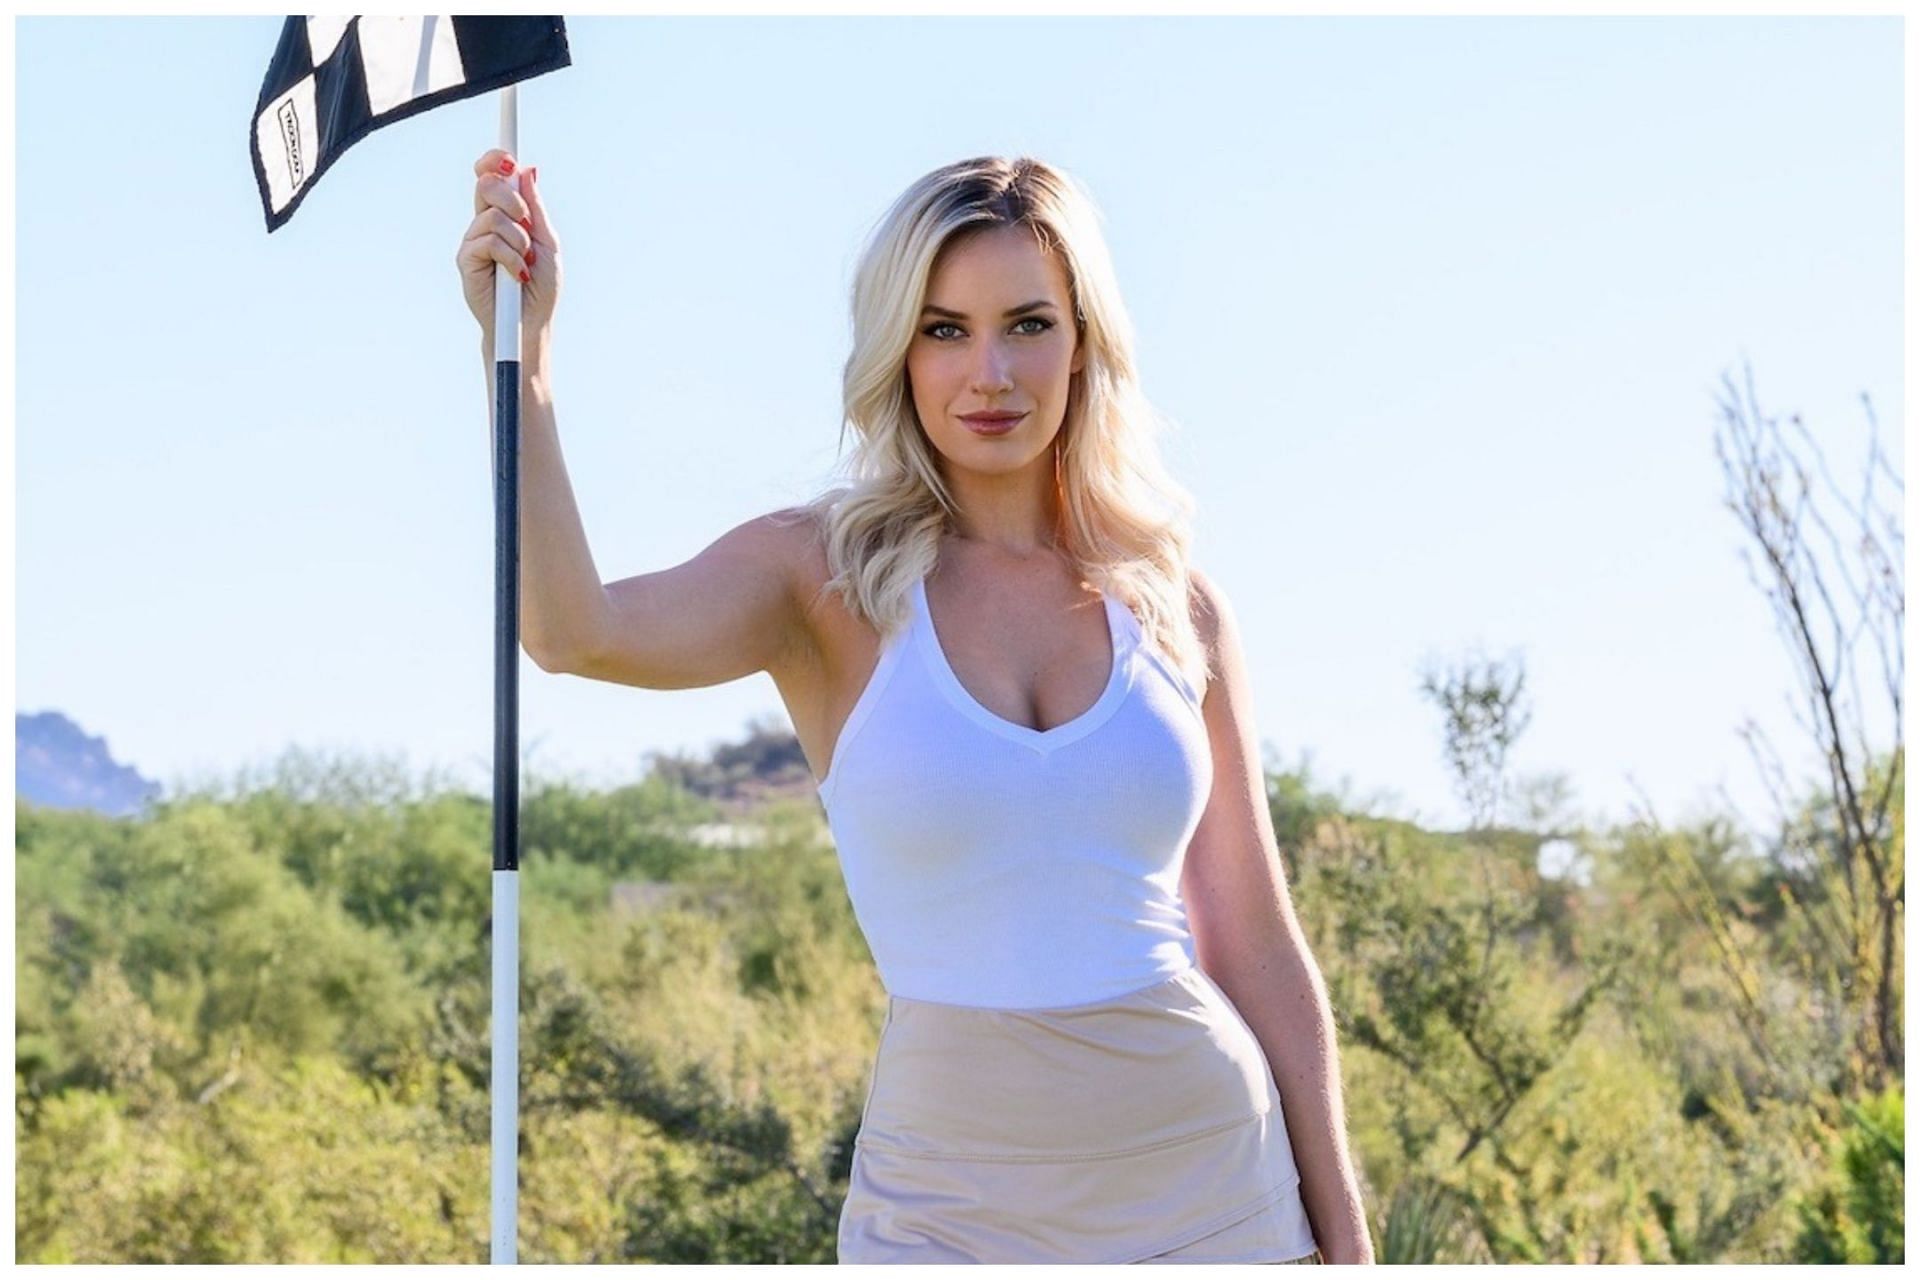 Massive drives and massive t**s - Paige Spiranac releases new video on  'how to swing with a big chest